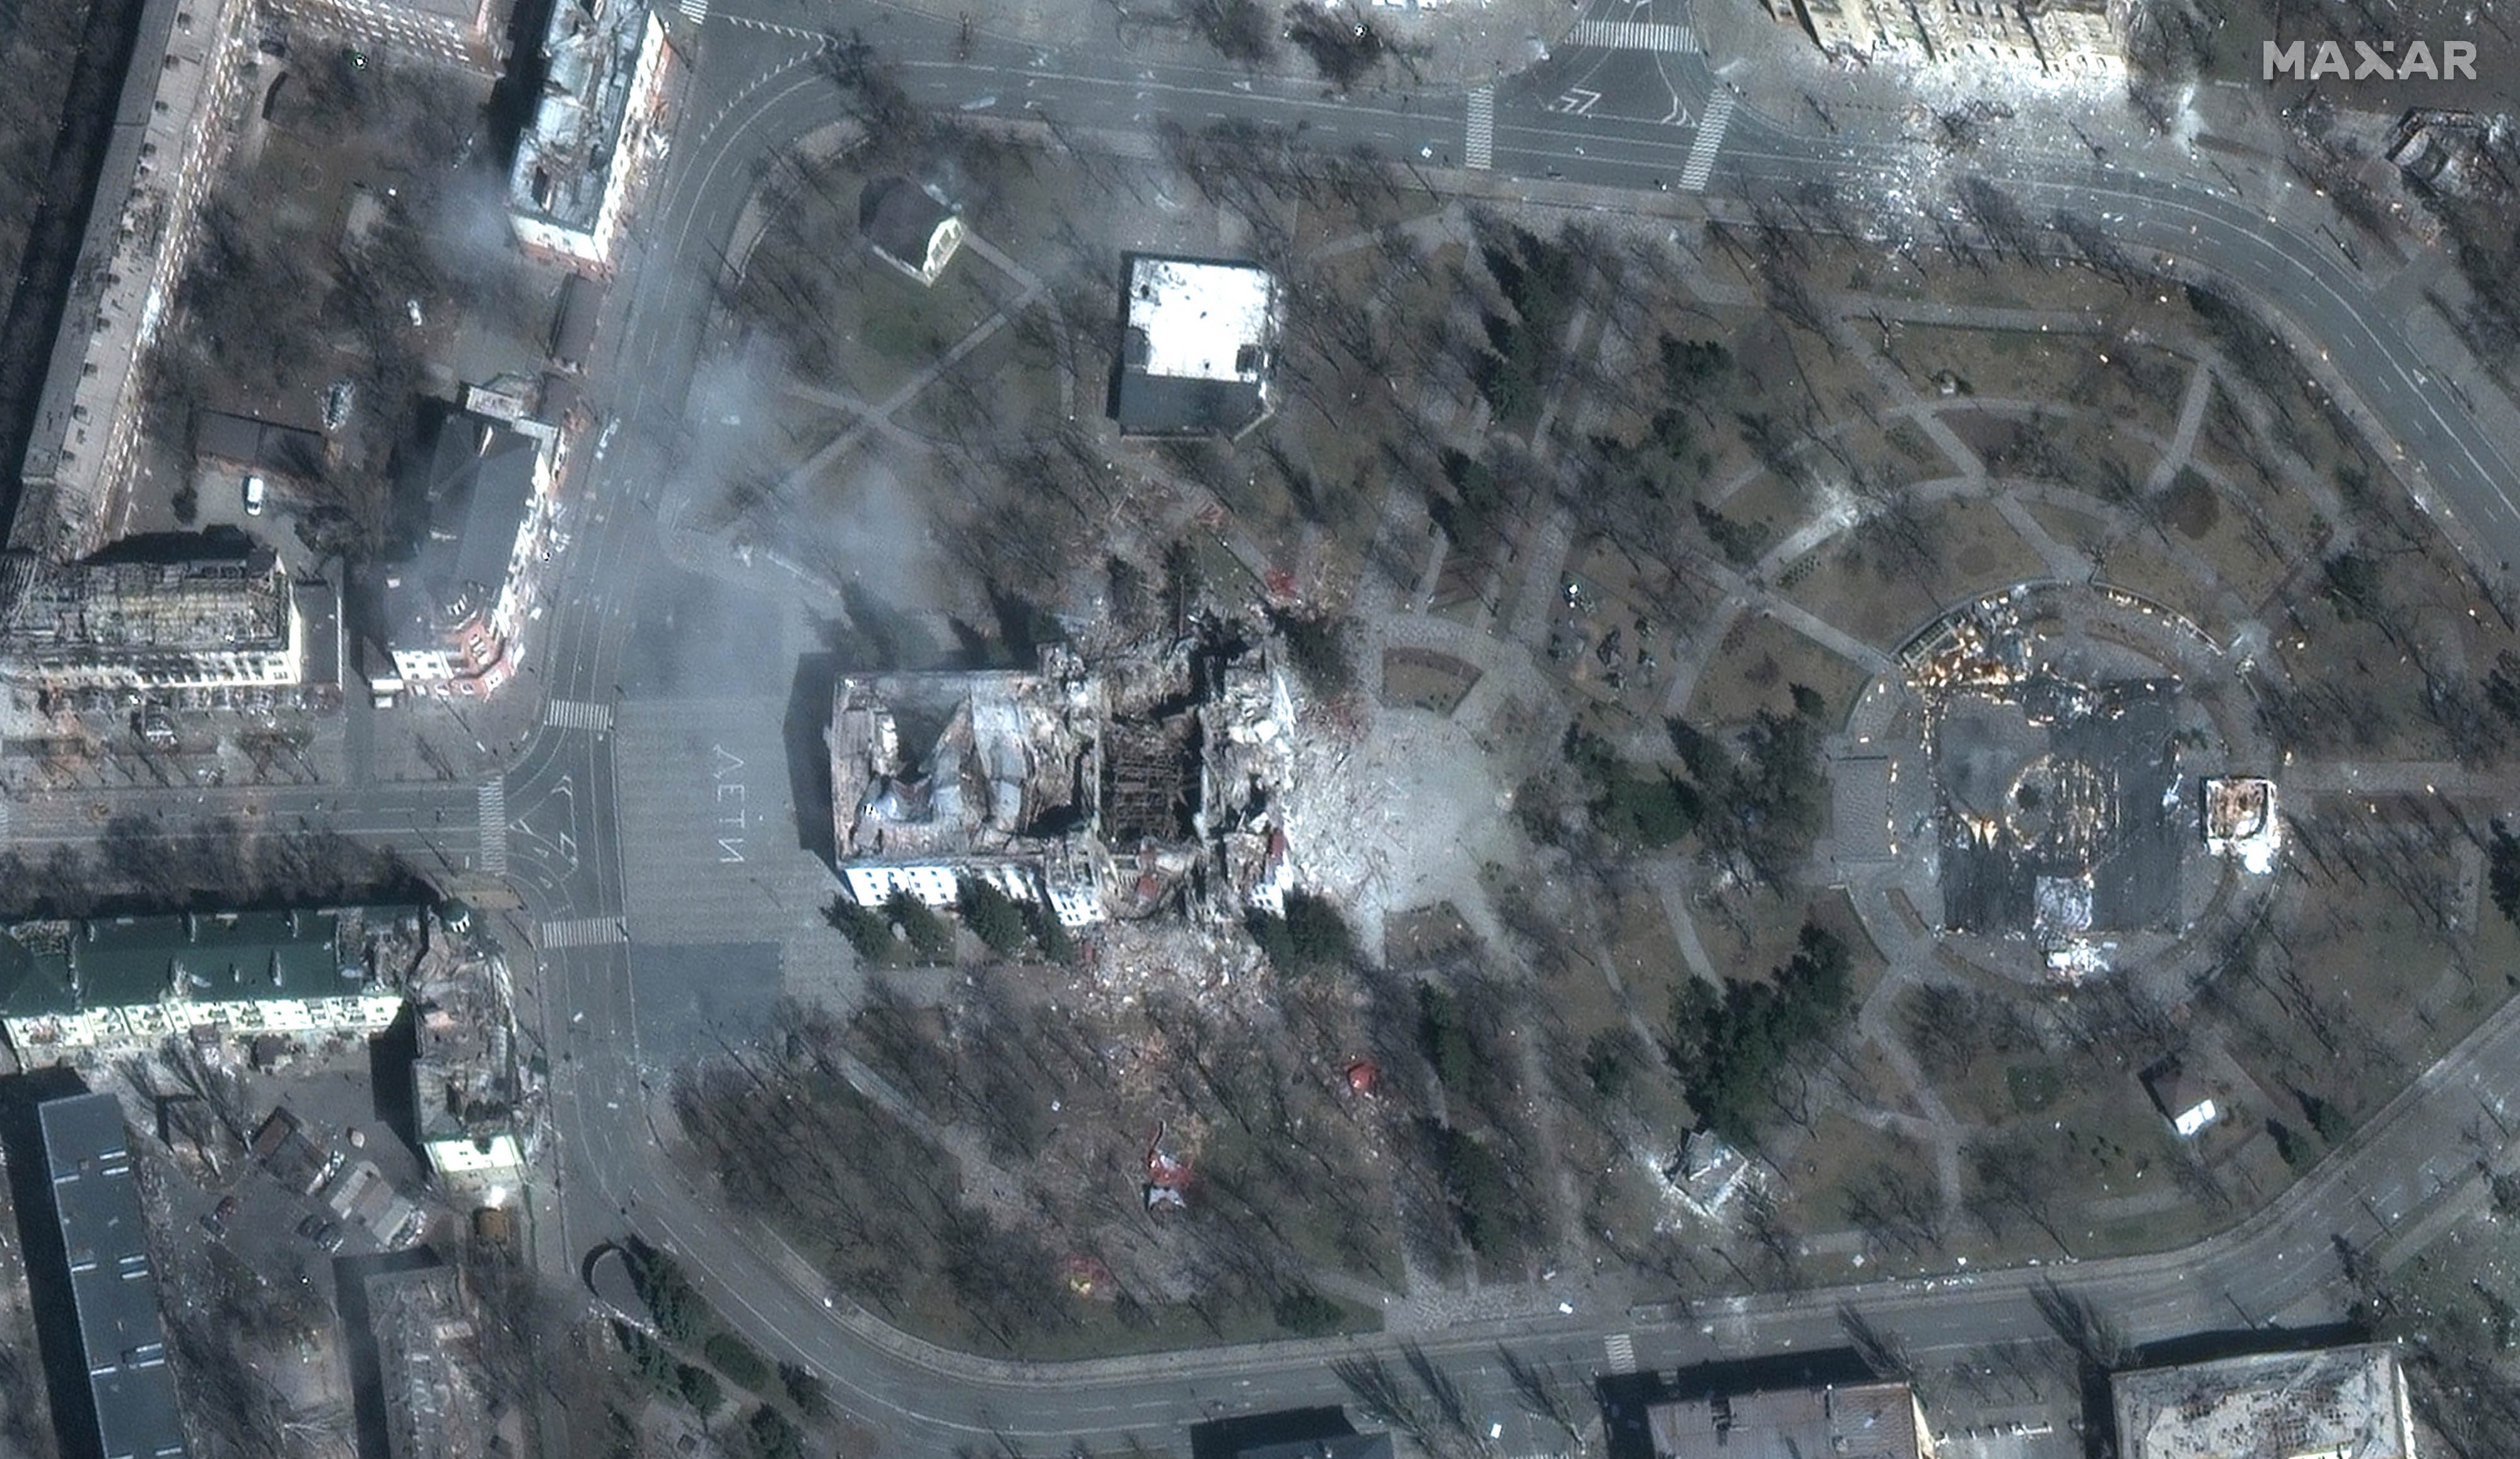 FILE - This combination of satellite images provided by Maxar Technologies shows the destroyed Mariupol, Ukraine Theater on March 29, 2022, top, and a screen built around it seen on Nov. 30, 2022. (Maxar Technologies via AP, File) ORG XMIT: NY487